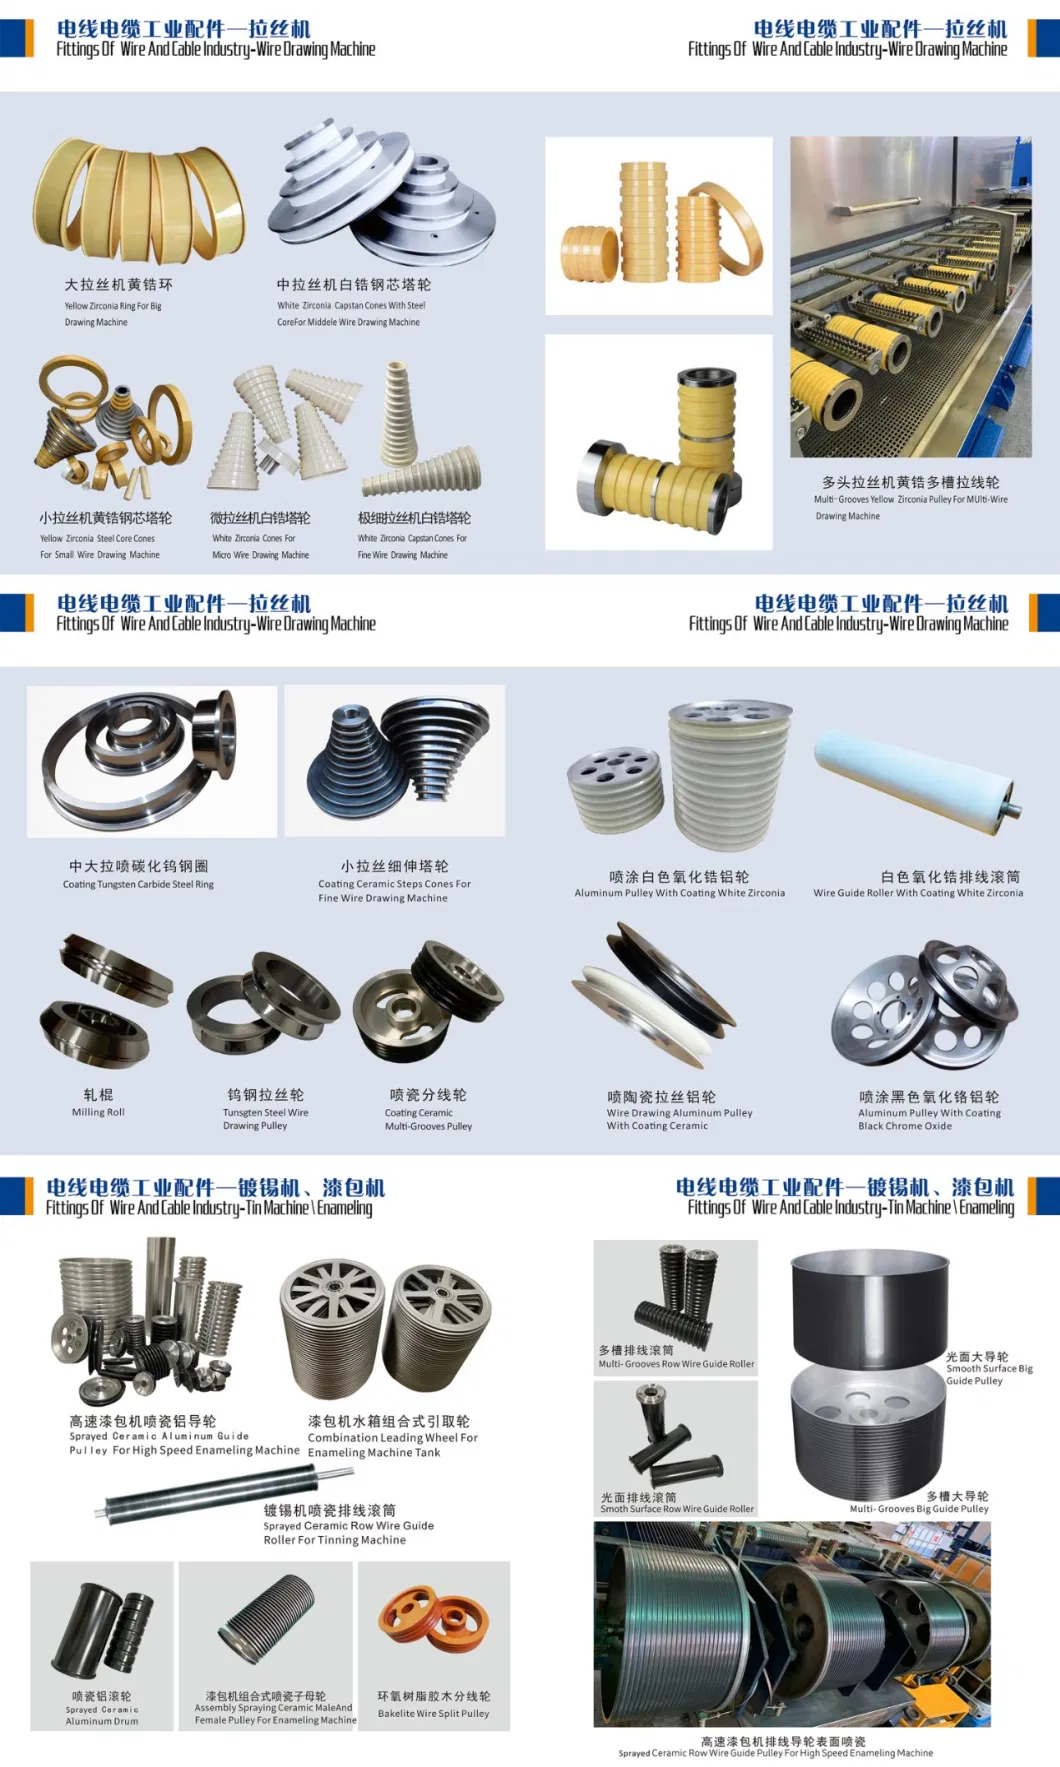 Enamelling Machine Pulley Leading Pulley Aluminum Guide Pulley